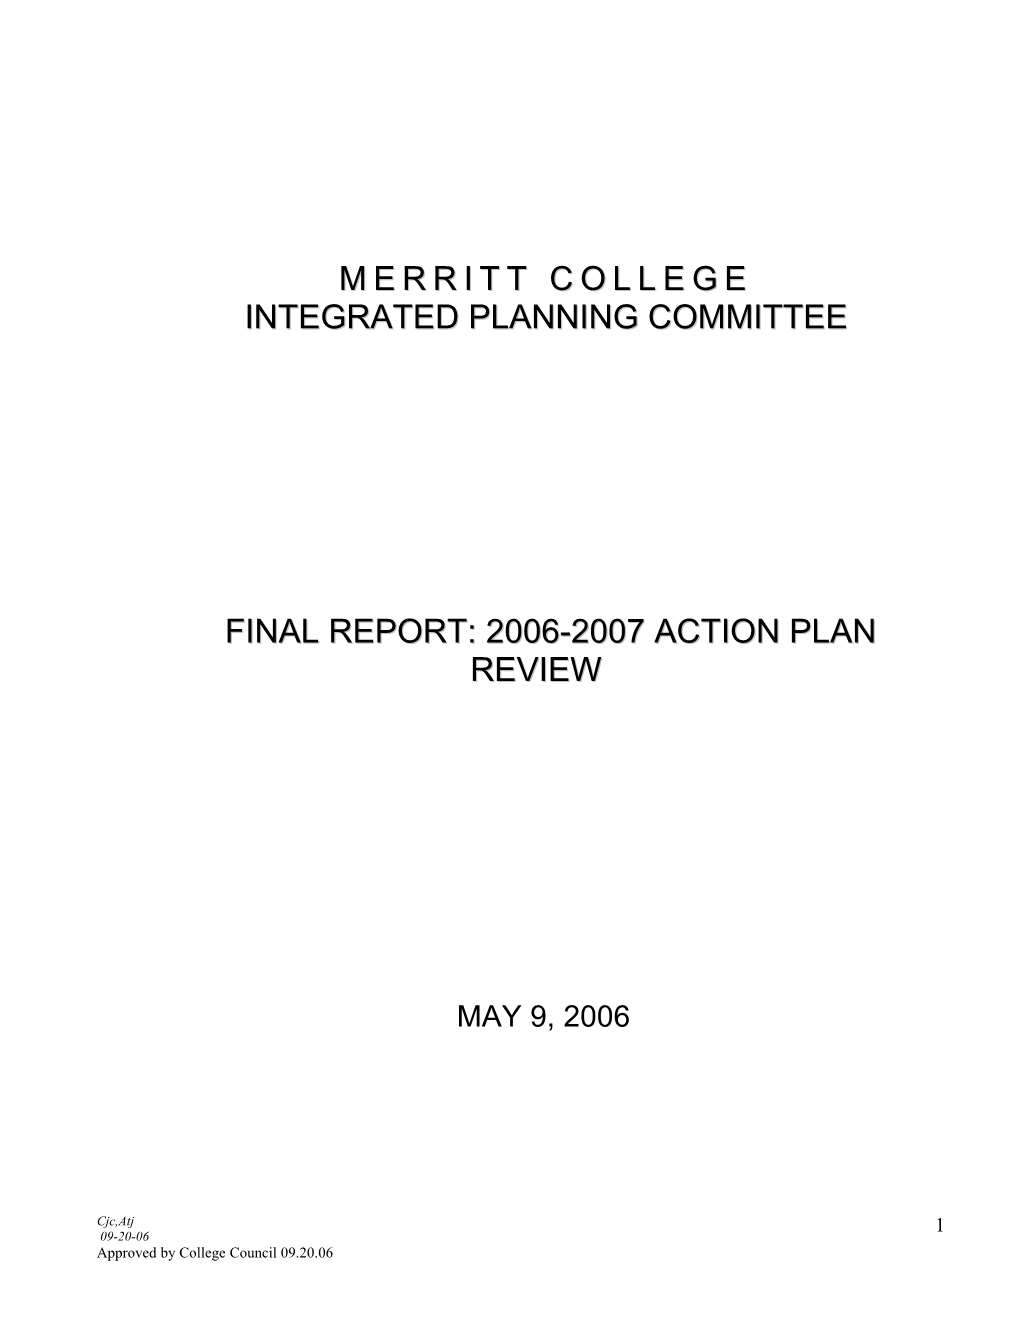 Final Report: 2006-2007 Action Plan Review